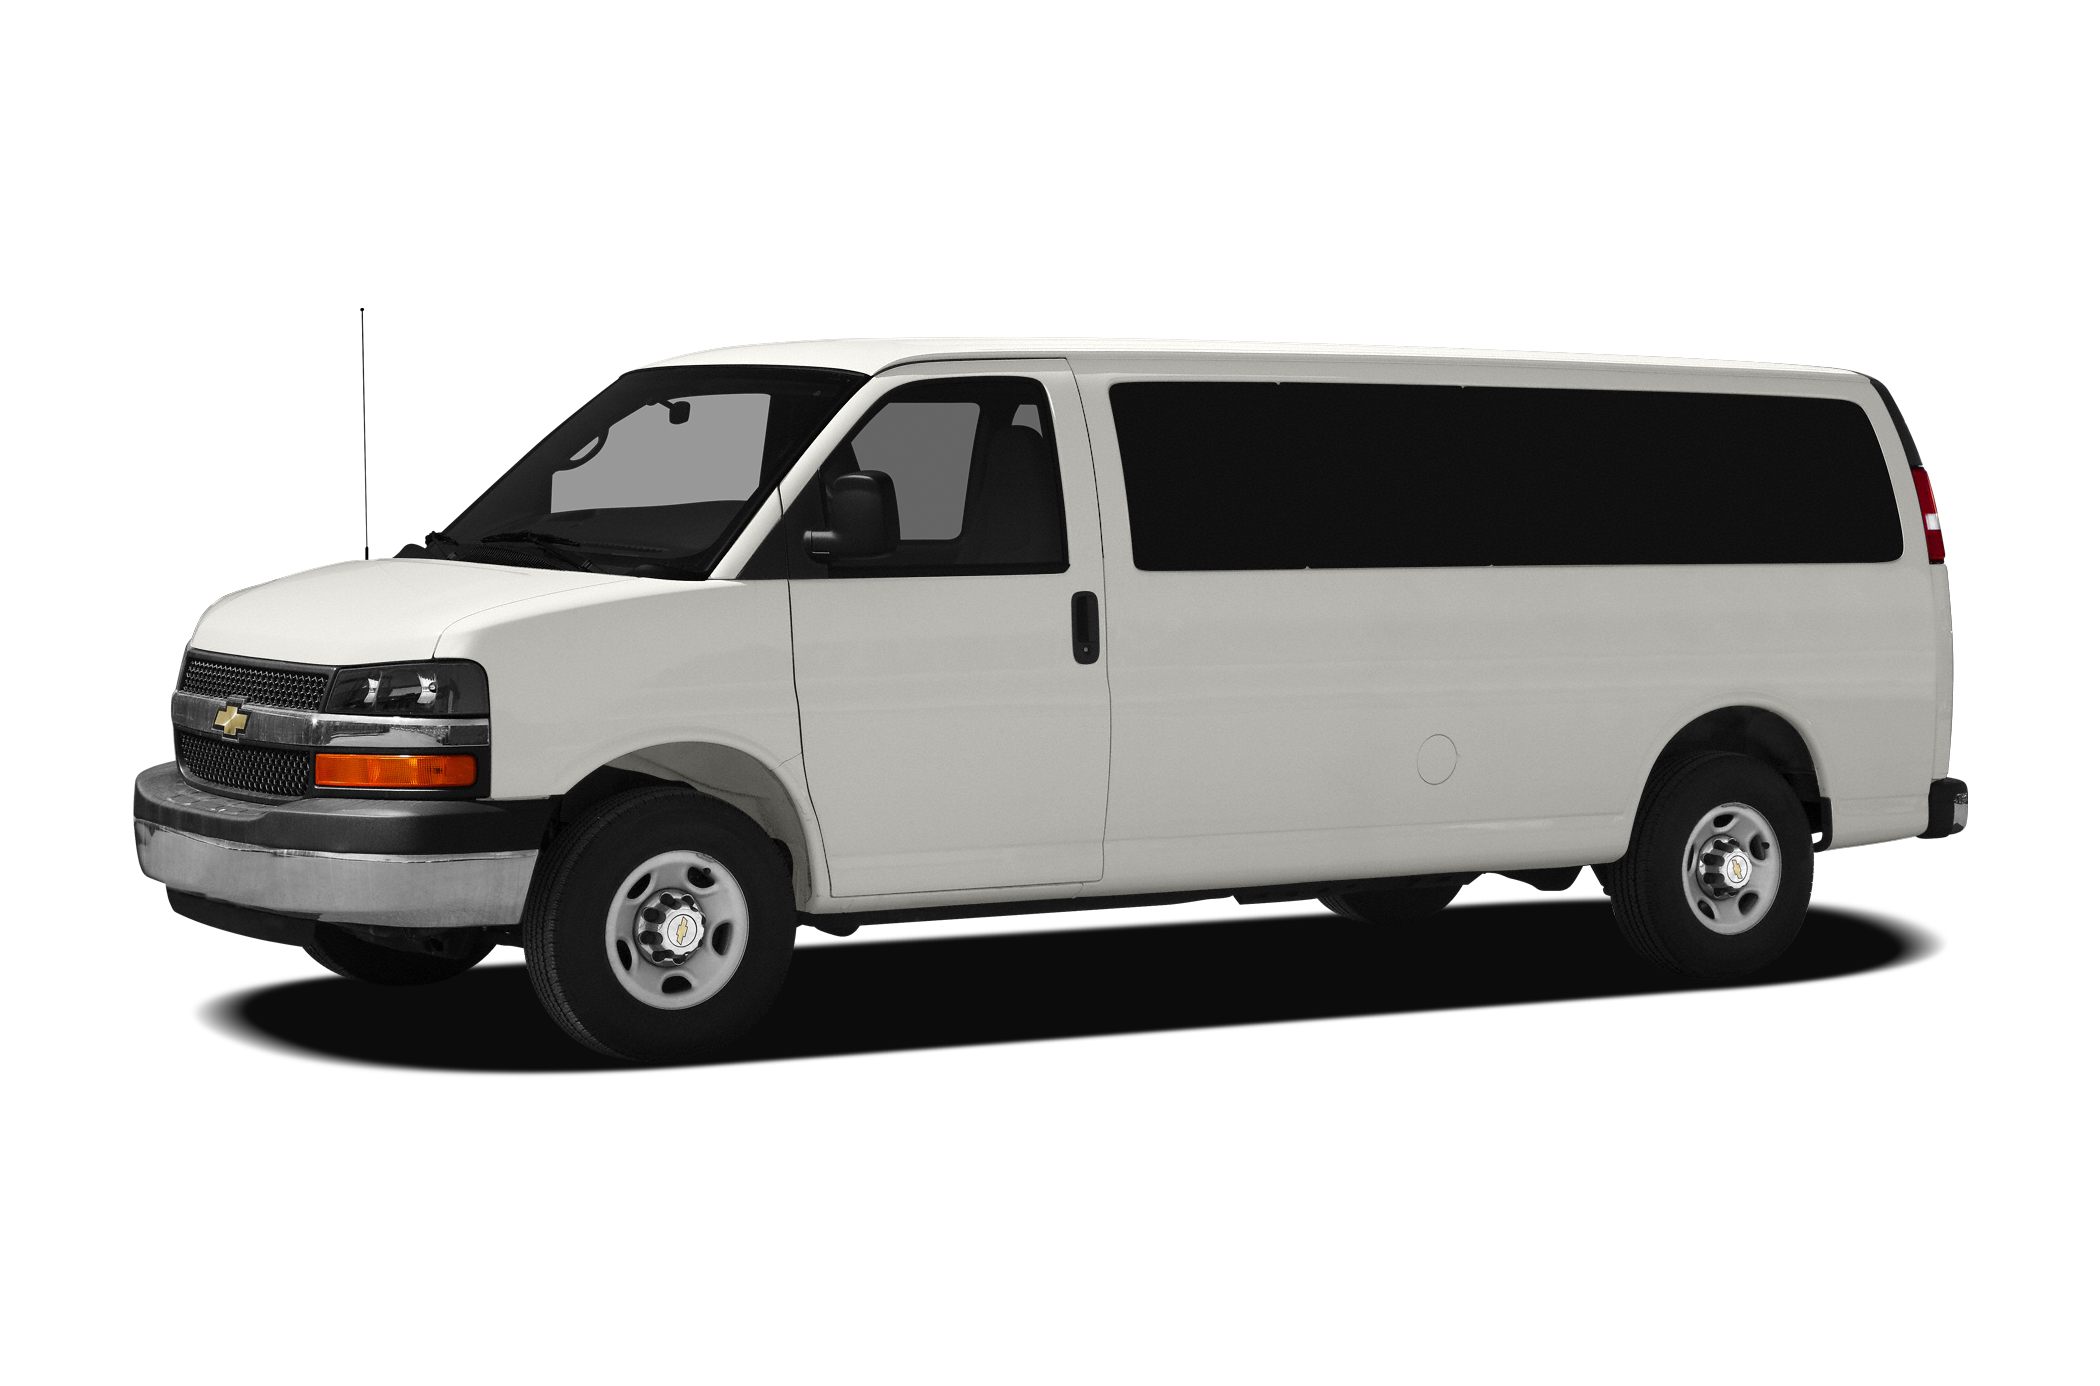 2009 Chevrolet Express 3500 Specs and 